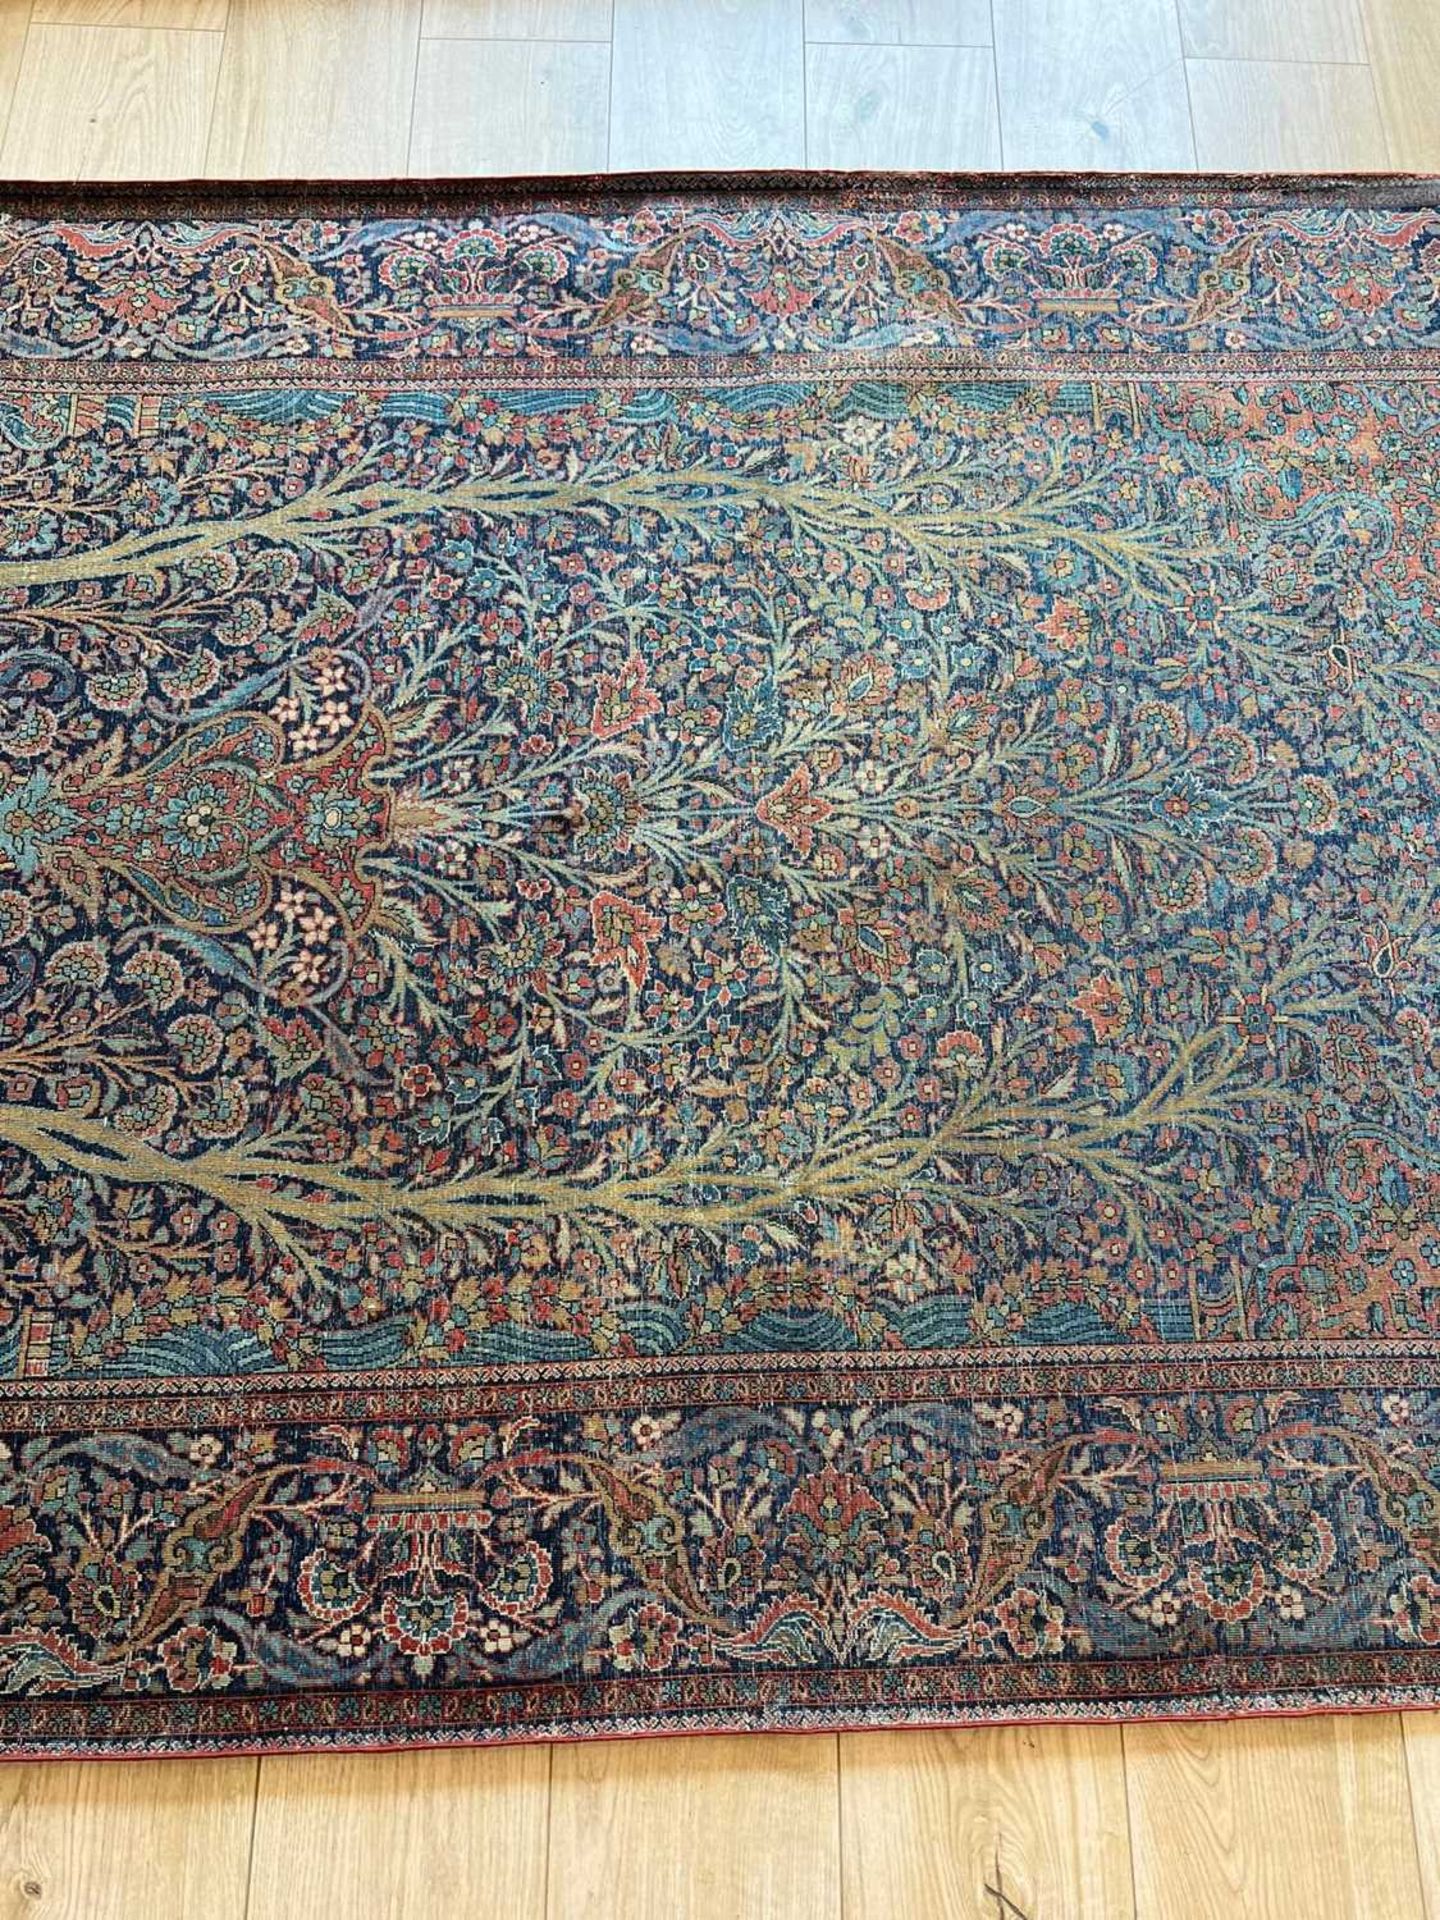 A FINE PAIR OF 1920'S MOHTASHAM KASHAN CARPETS - Image 10 of 38